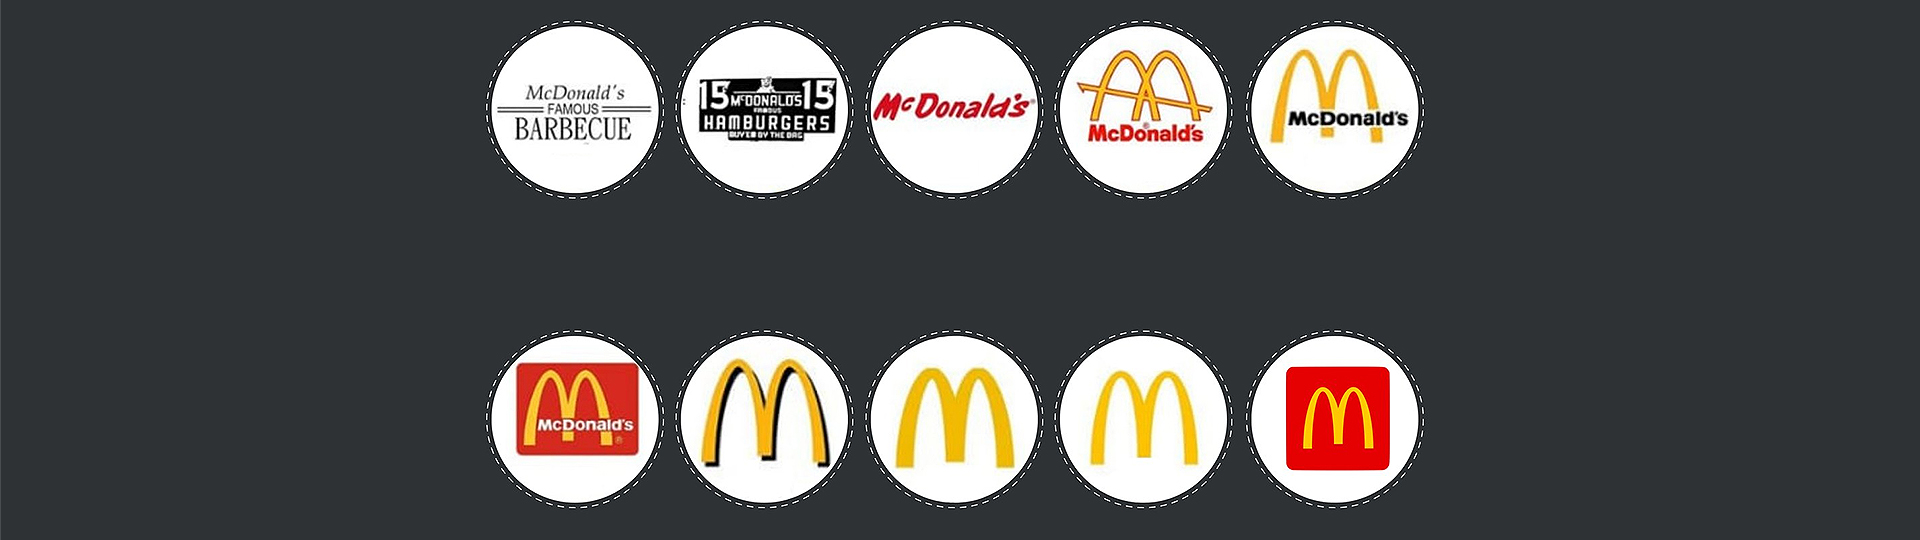 Mcdonald Logo History Meaning And Evolution Of Golden Arches